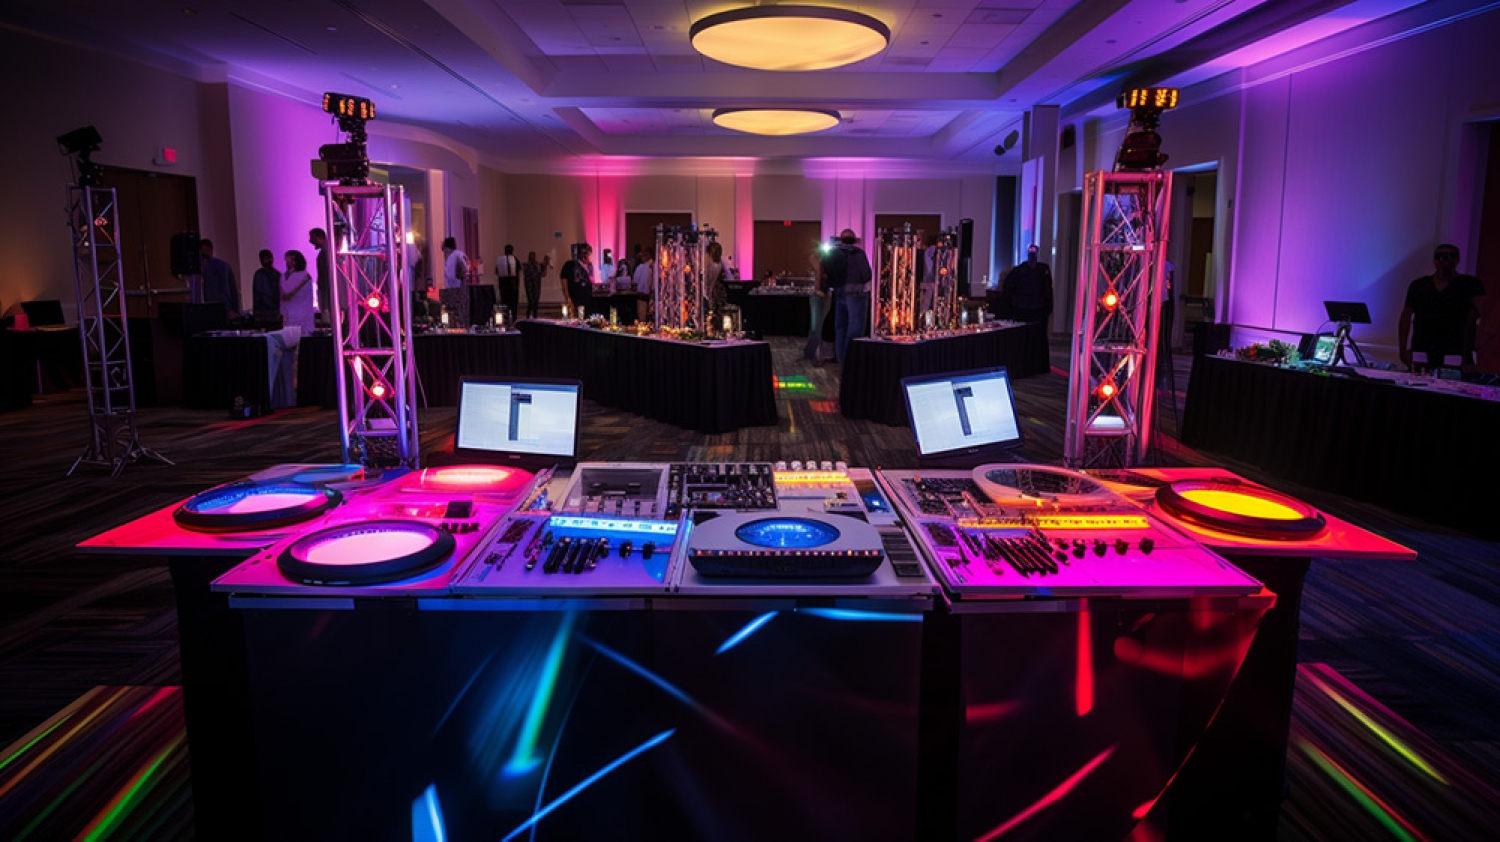 Fun Corporate Events With DJs & Photo Booths